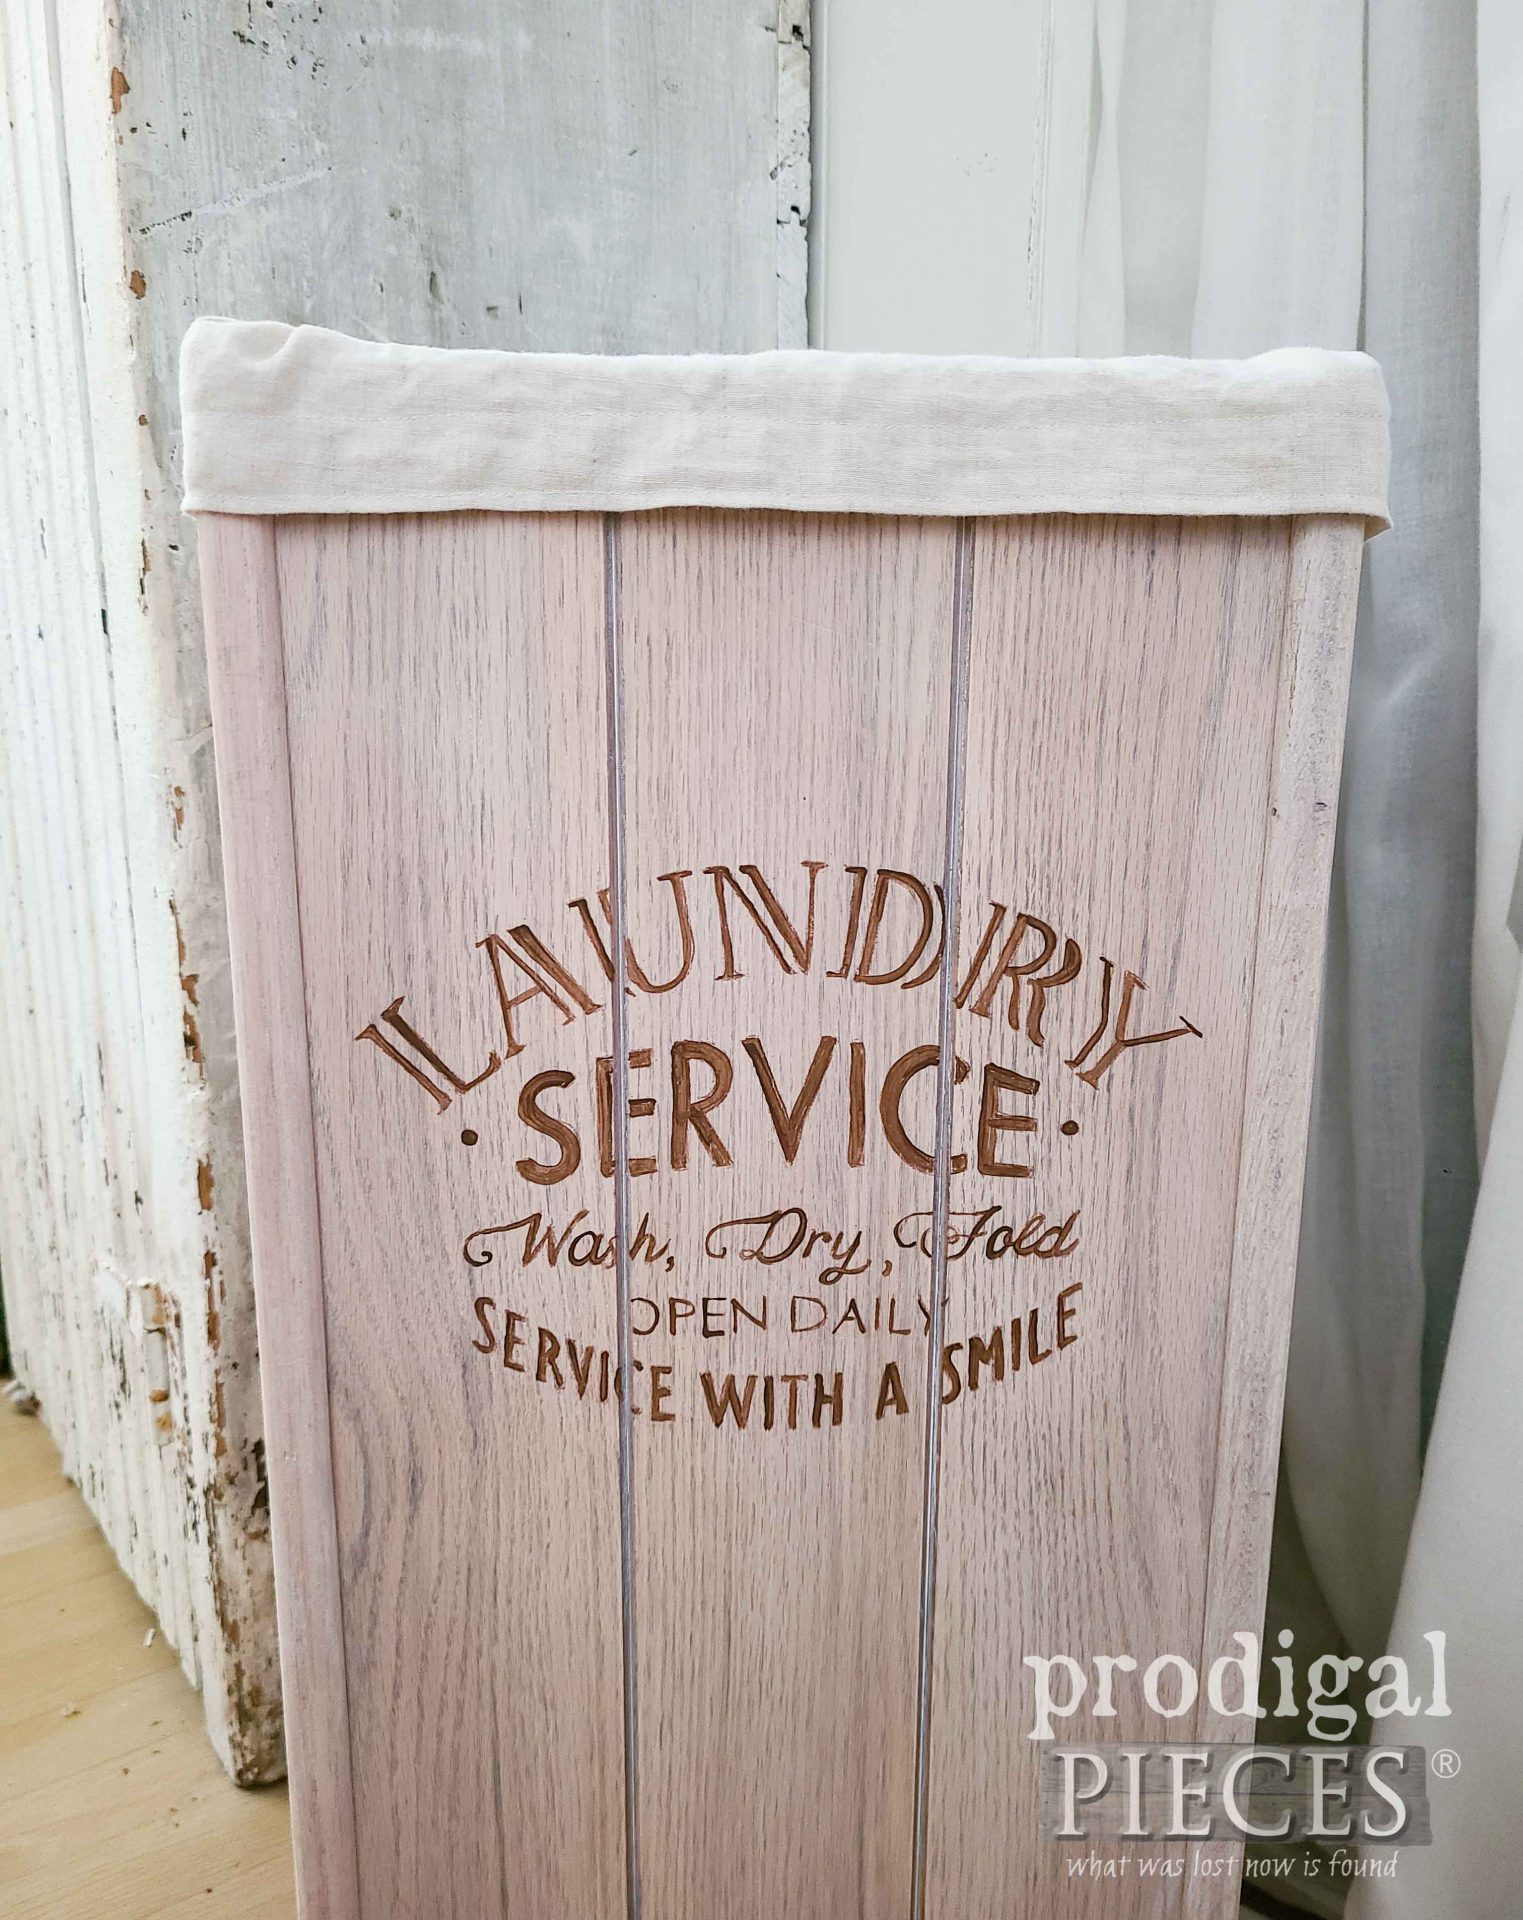 Hand-Painted Laundry Bin with Linen Laundry Bag from Upcycled Vintge Wooden Trash Bin by Larissa of Prodigal Pieces | prodigalpieces.com #prodigalpieces #laundry #linen #farmhouse #vintage